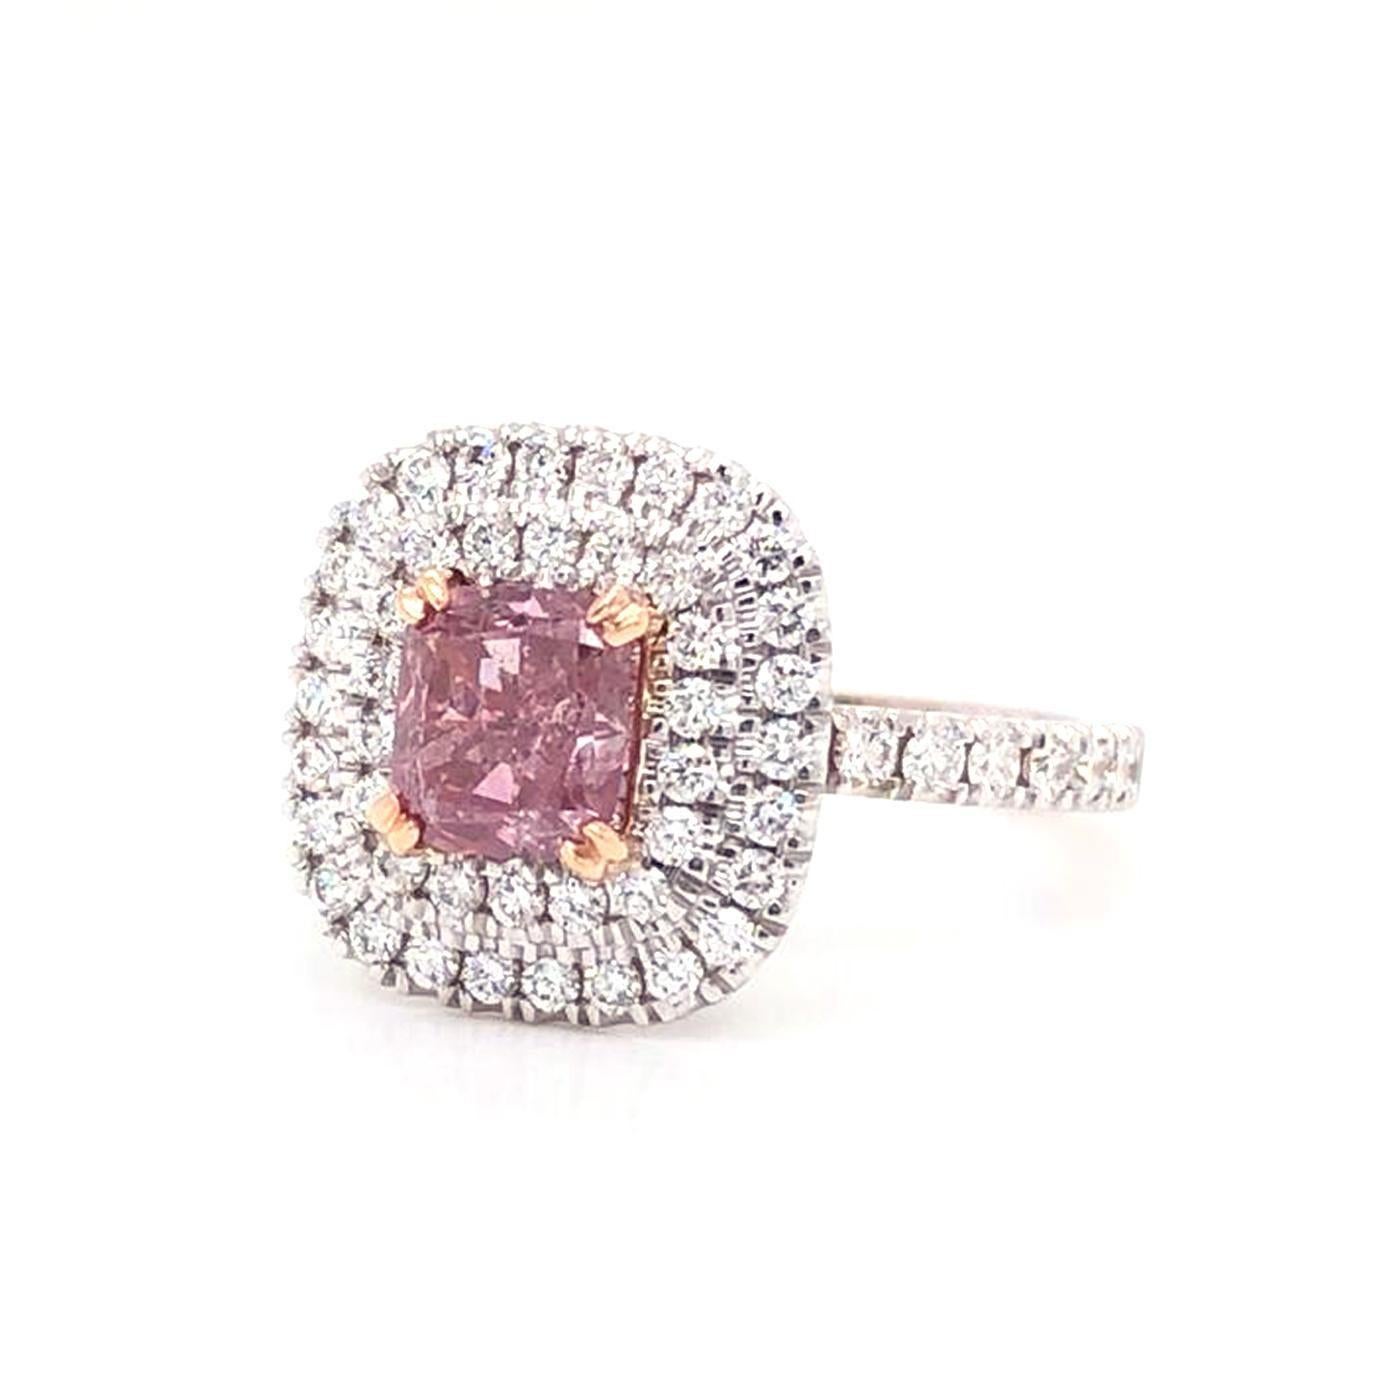 Alluring 18k White Gold and Rose Gold engagement ring featuring a jaw-dropping GIA graded Center Natural Fancy Intense Purple Pink 1.01ct Diamond Ring surrounded with 1.15ct TW Cushion Diamonds D color and VVS1 clarity with 5.5 (Sizable), This